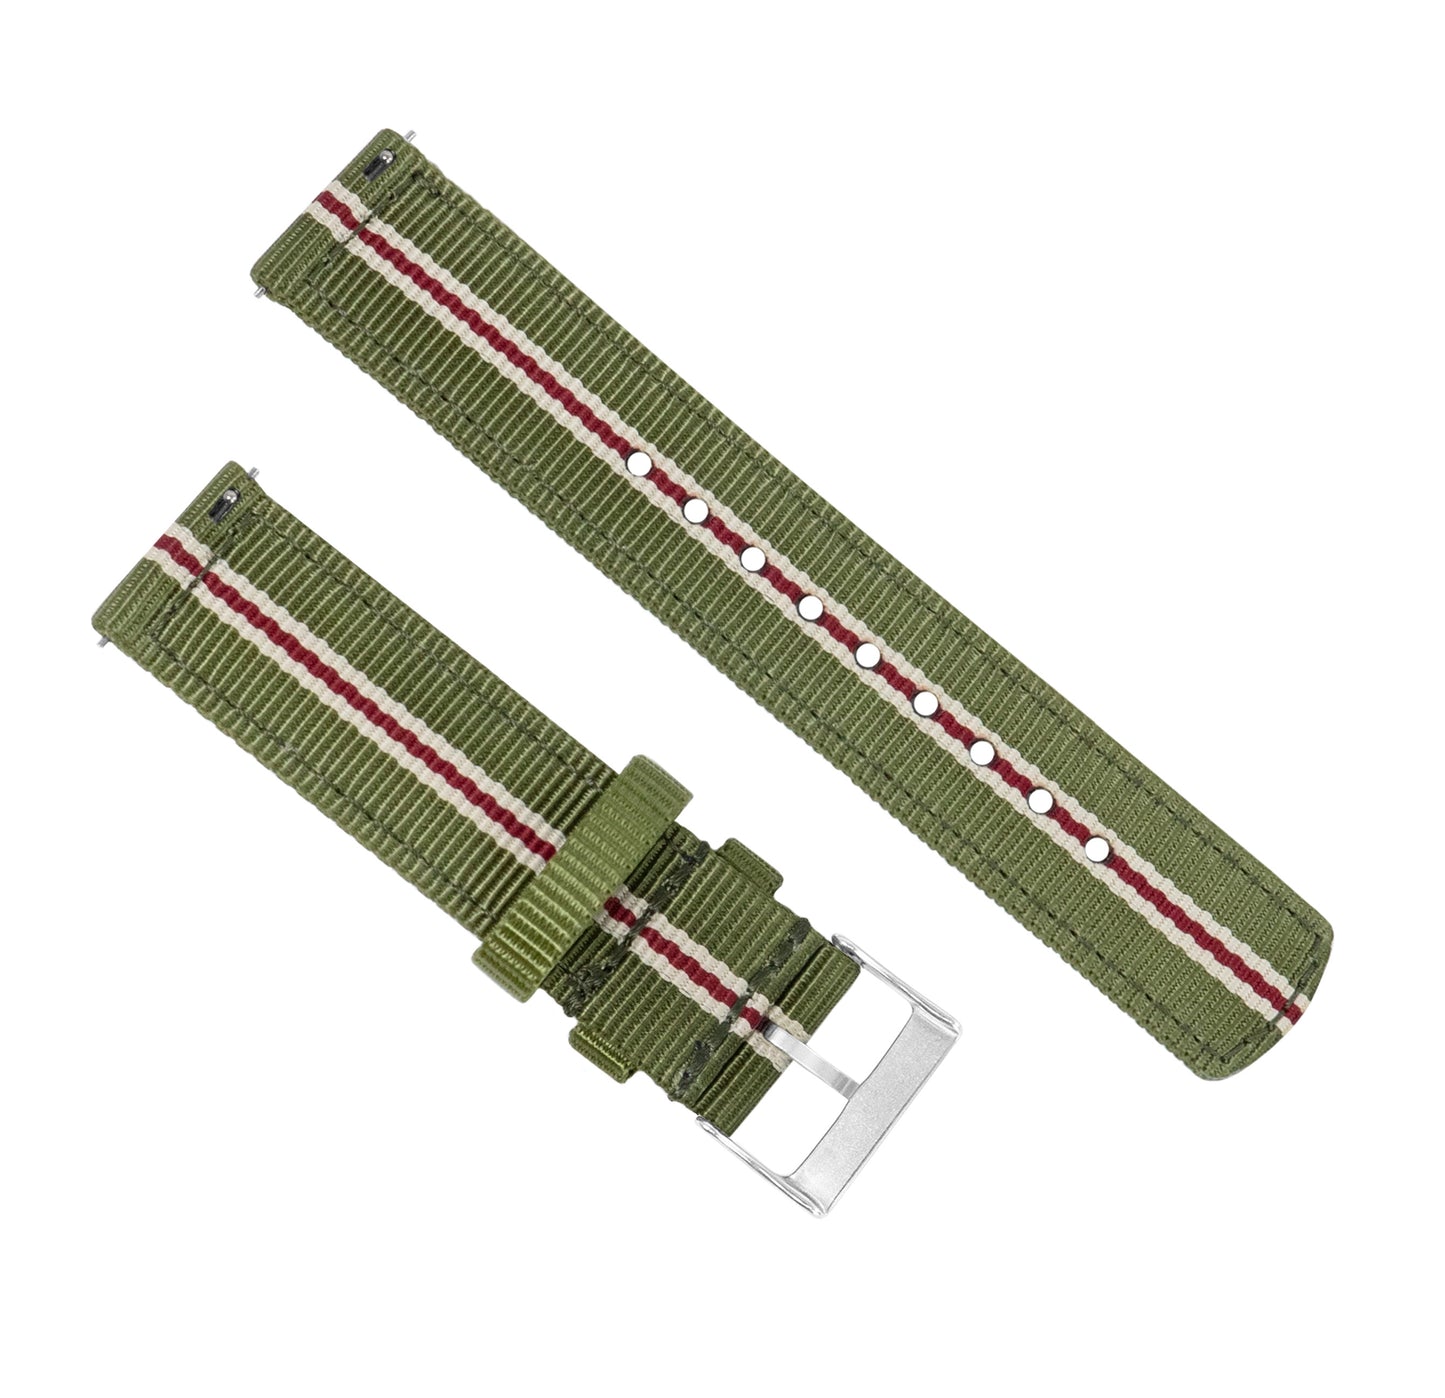 Fossil Gen 5 | Two-Piece NATO Style | Army Green & Crimson - Barton Watch Bands